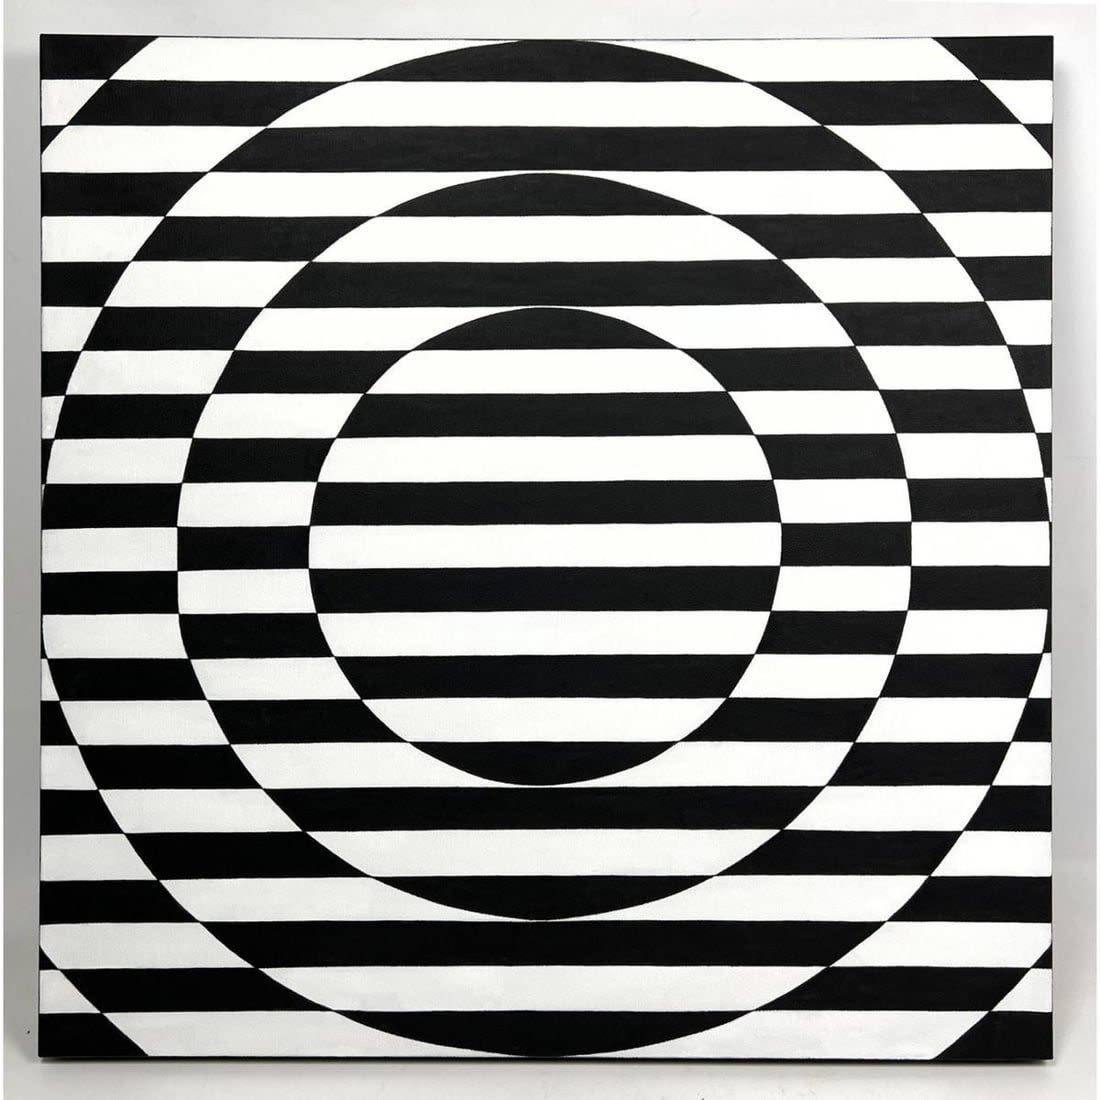 TIM RAY FISHER Painting OP ART